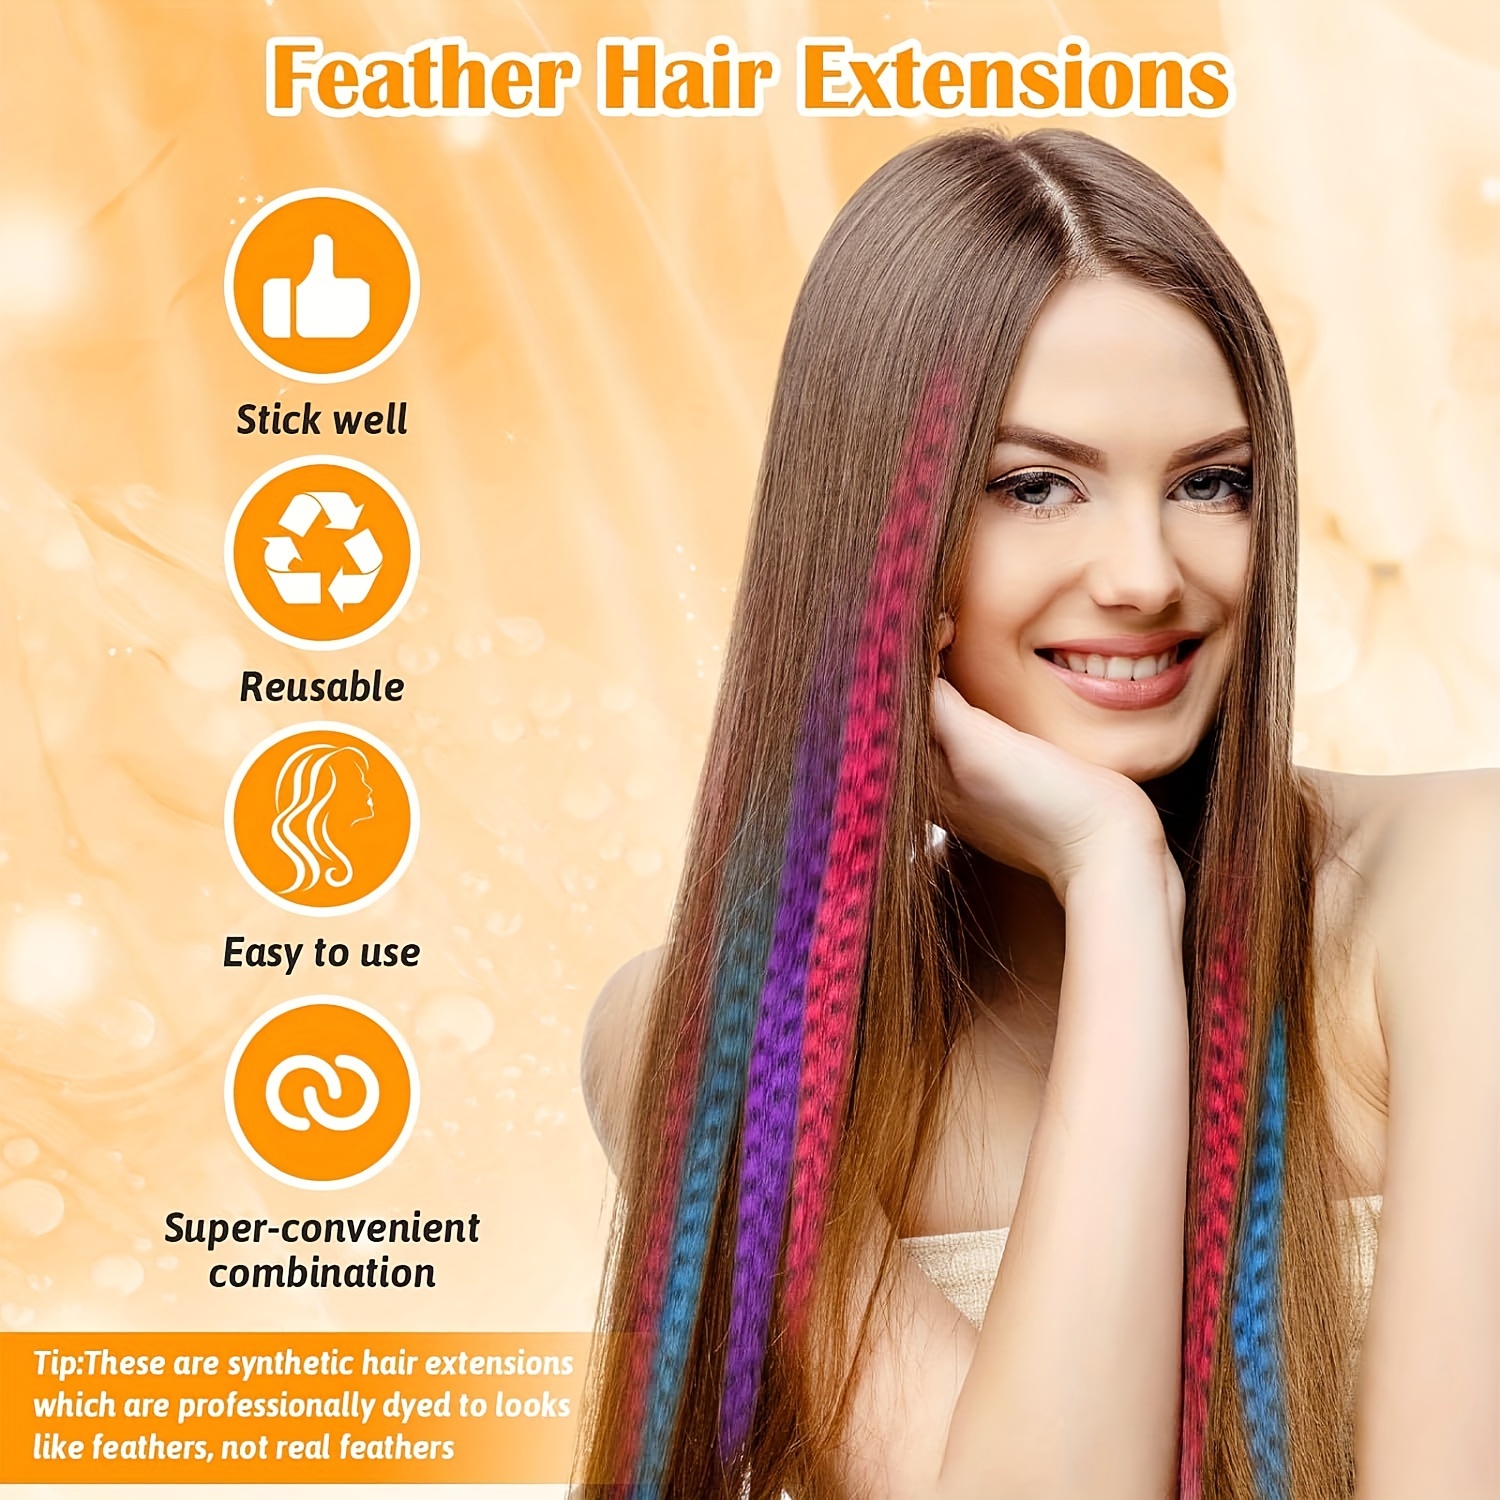 NEW 7-11 Feather Hair Extension Kit 10 Long Multi color Genuine Single  Feathers + 10 Micro Beads & hook Tool (You will get mixed colors)